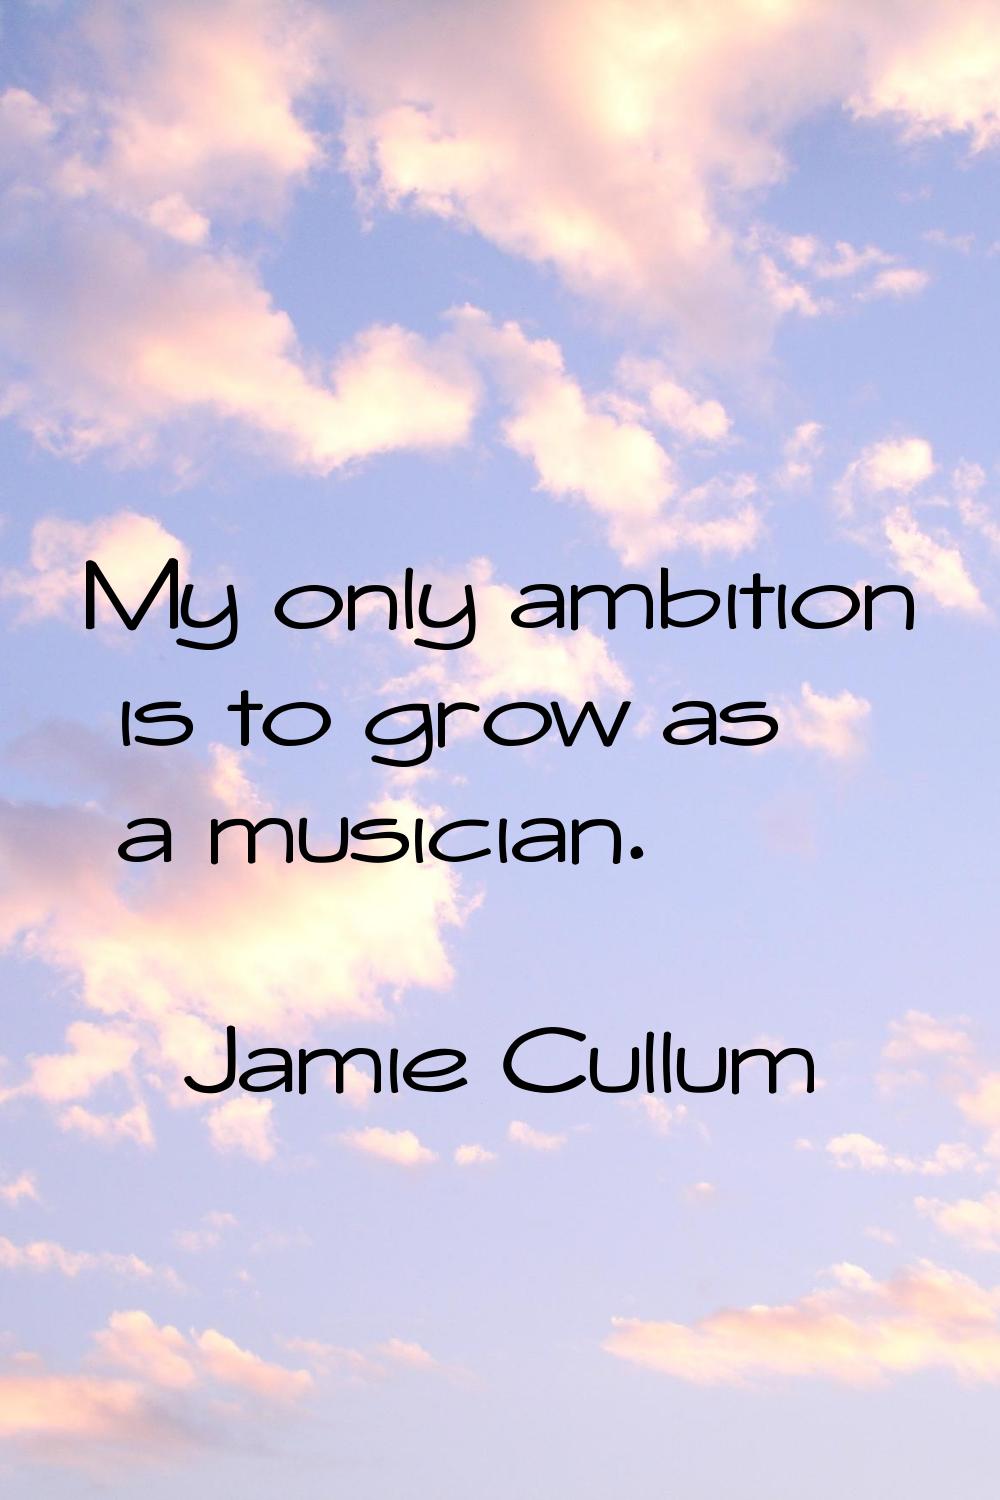 My only ambition is to grow as a musician.